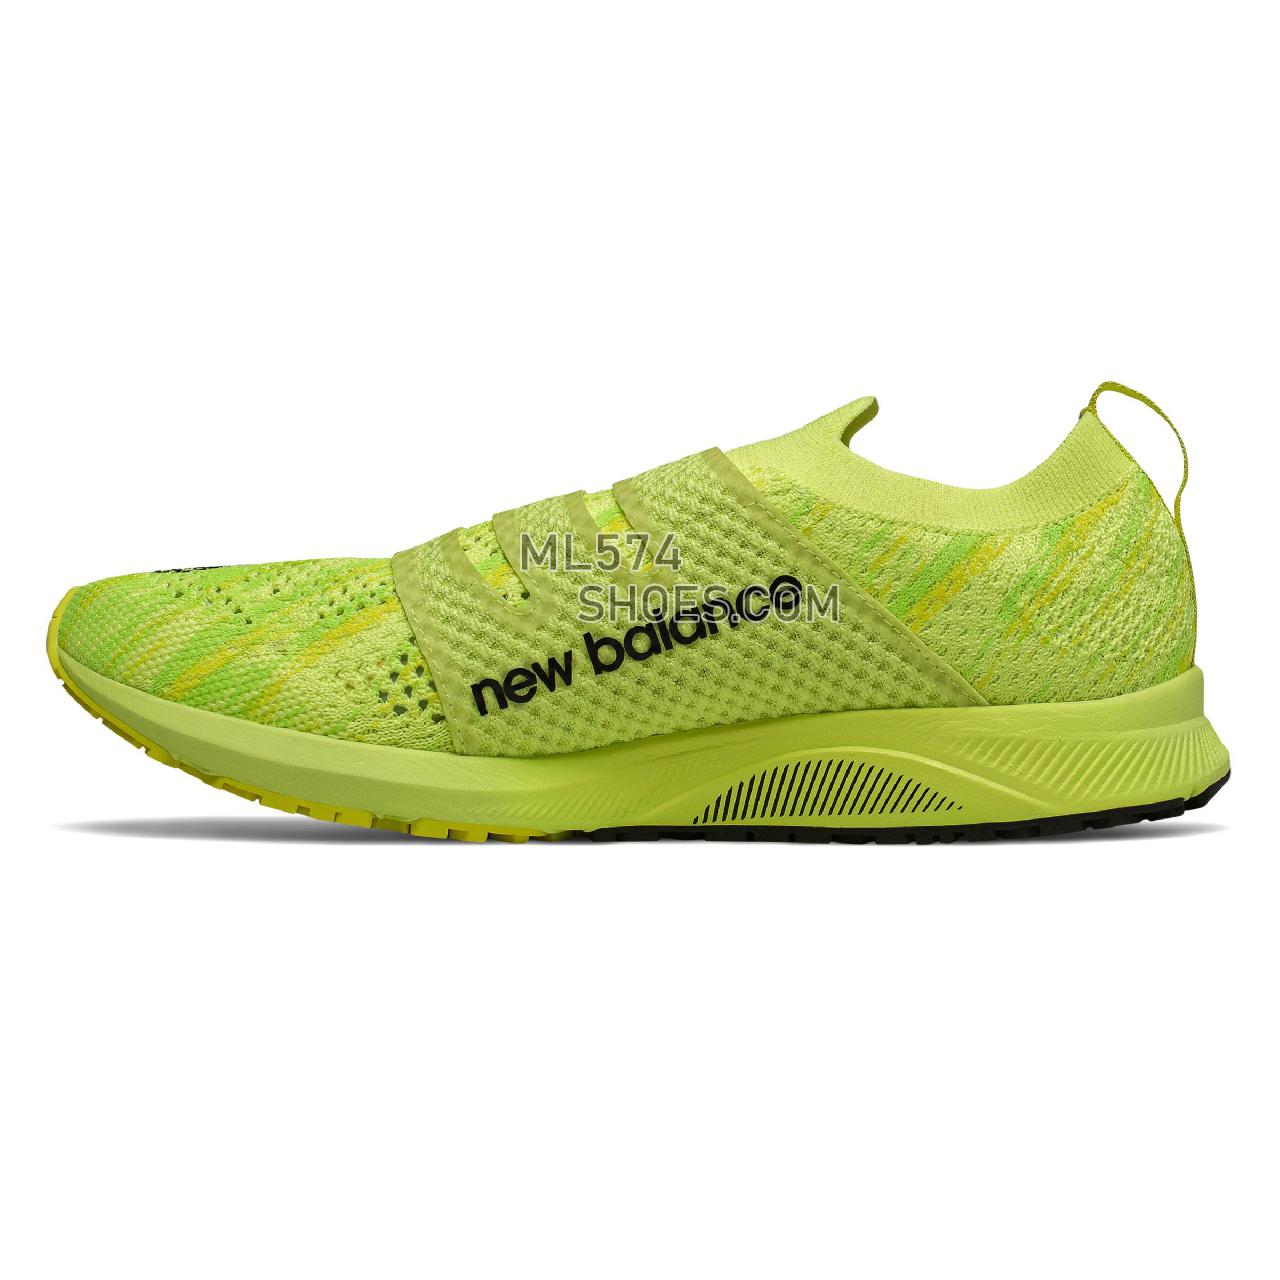 New Balance 1500T2 Boa - Men's Race Running - Sulphur Yellow with Bleached Lime Glo and Black - M1500TB2